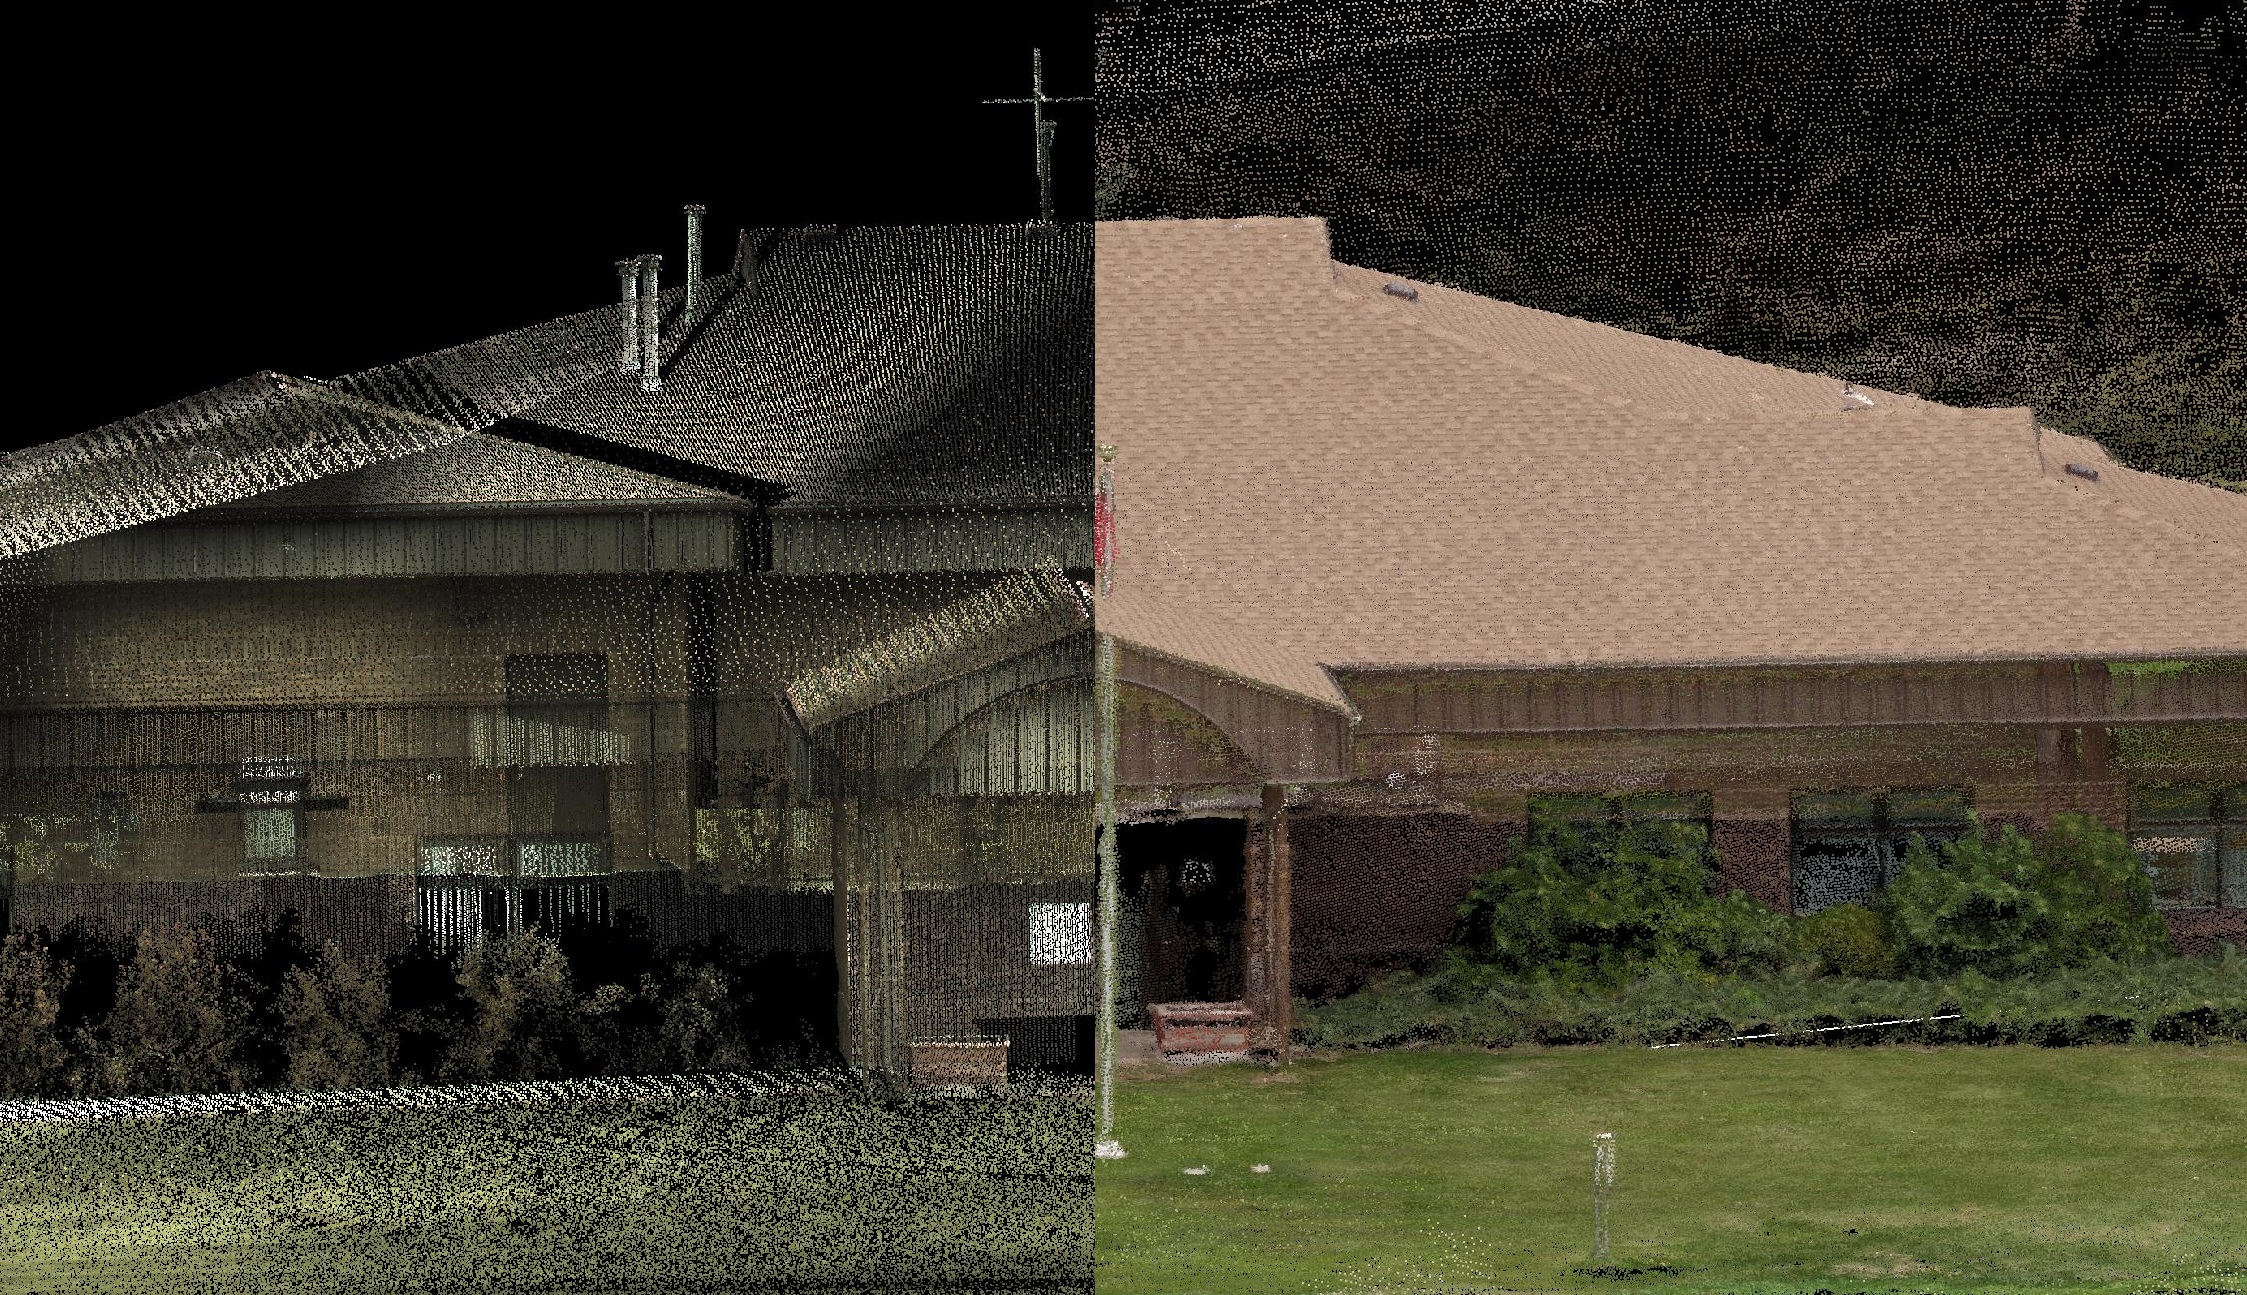 Two views of a structure mapped with Pix4D